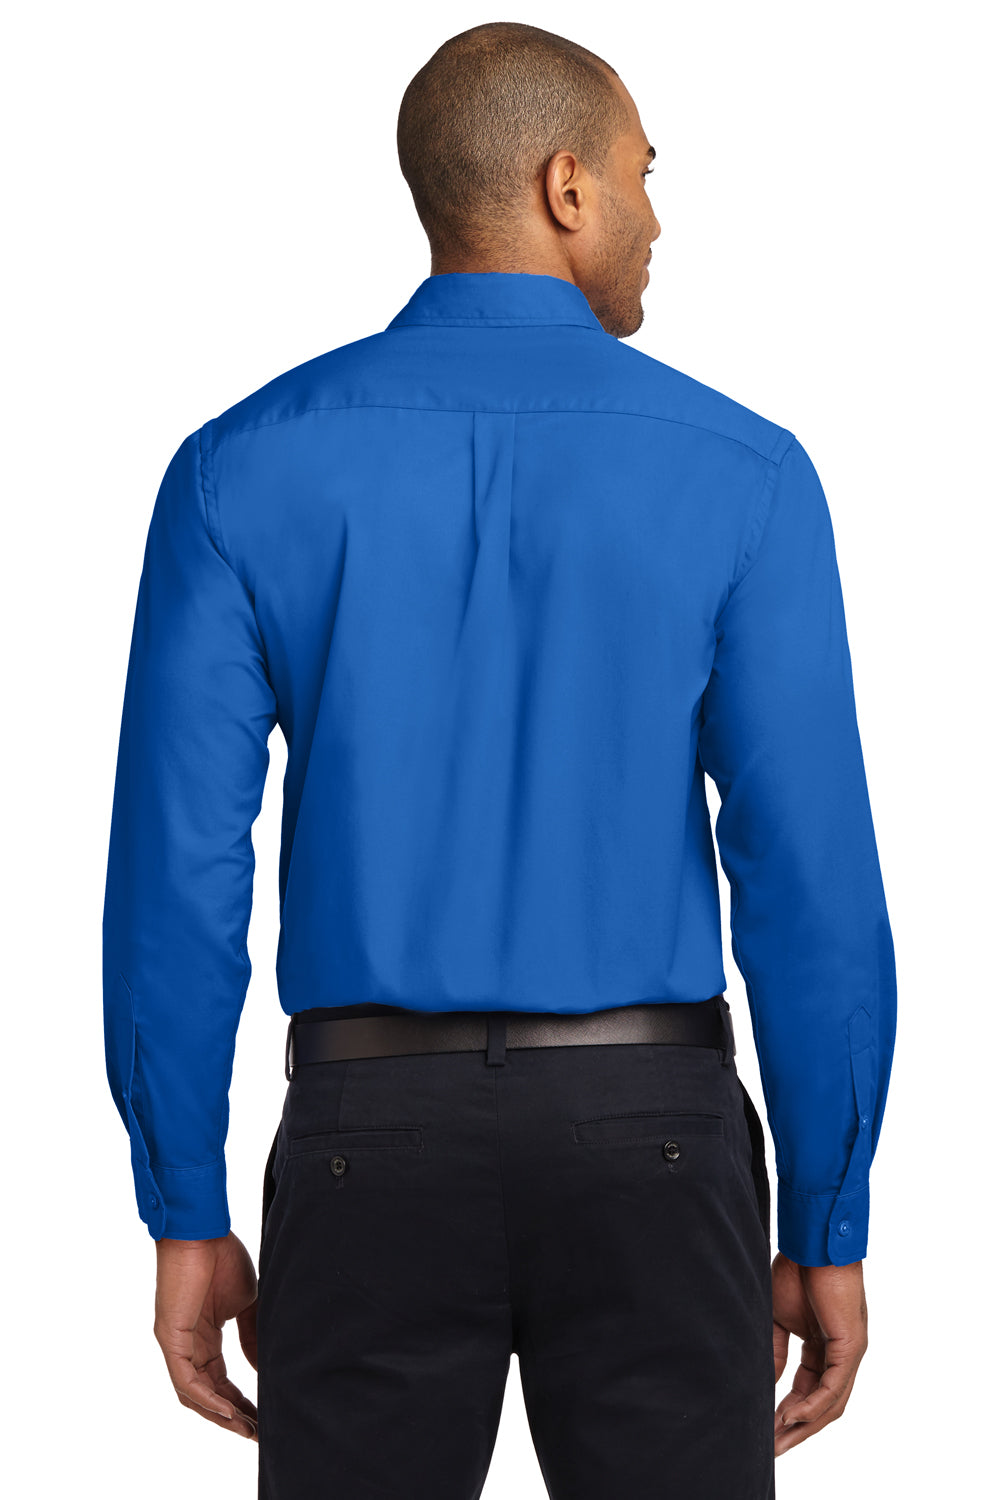 Port Authority S608/TLS608/S608ES Mens Easy Care Wrinkle Resistant Long Sleeve Button Down Shirt w/ Pocket Strong Blue Back